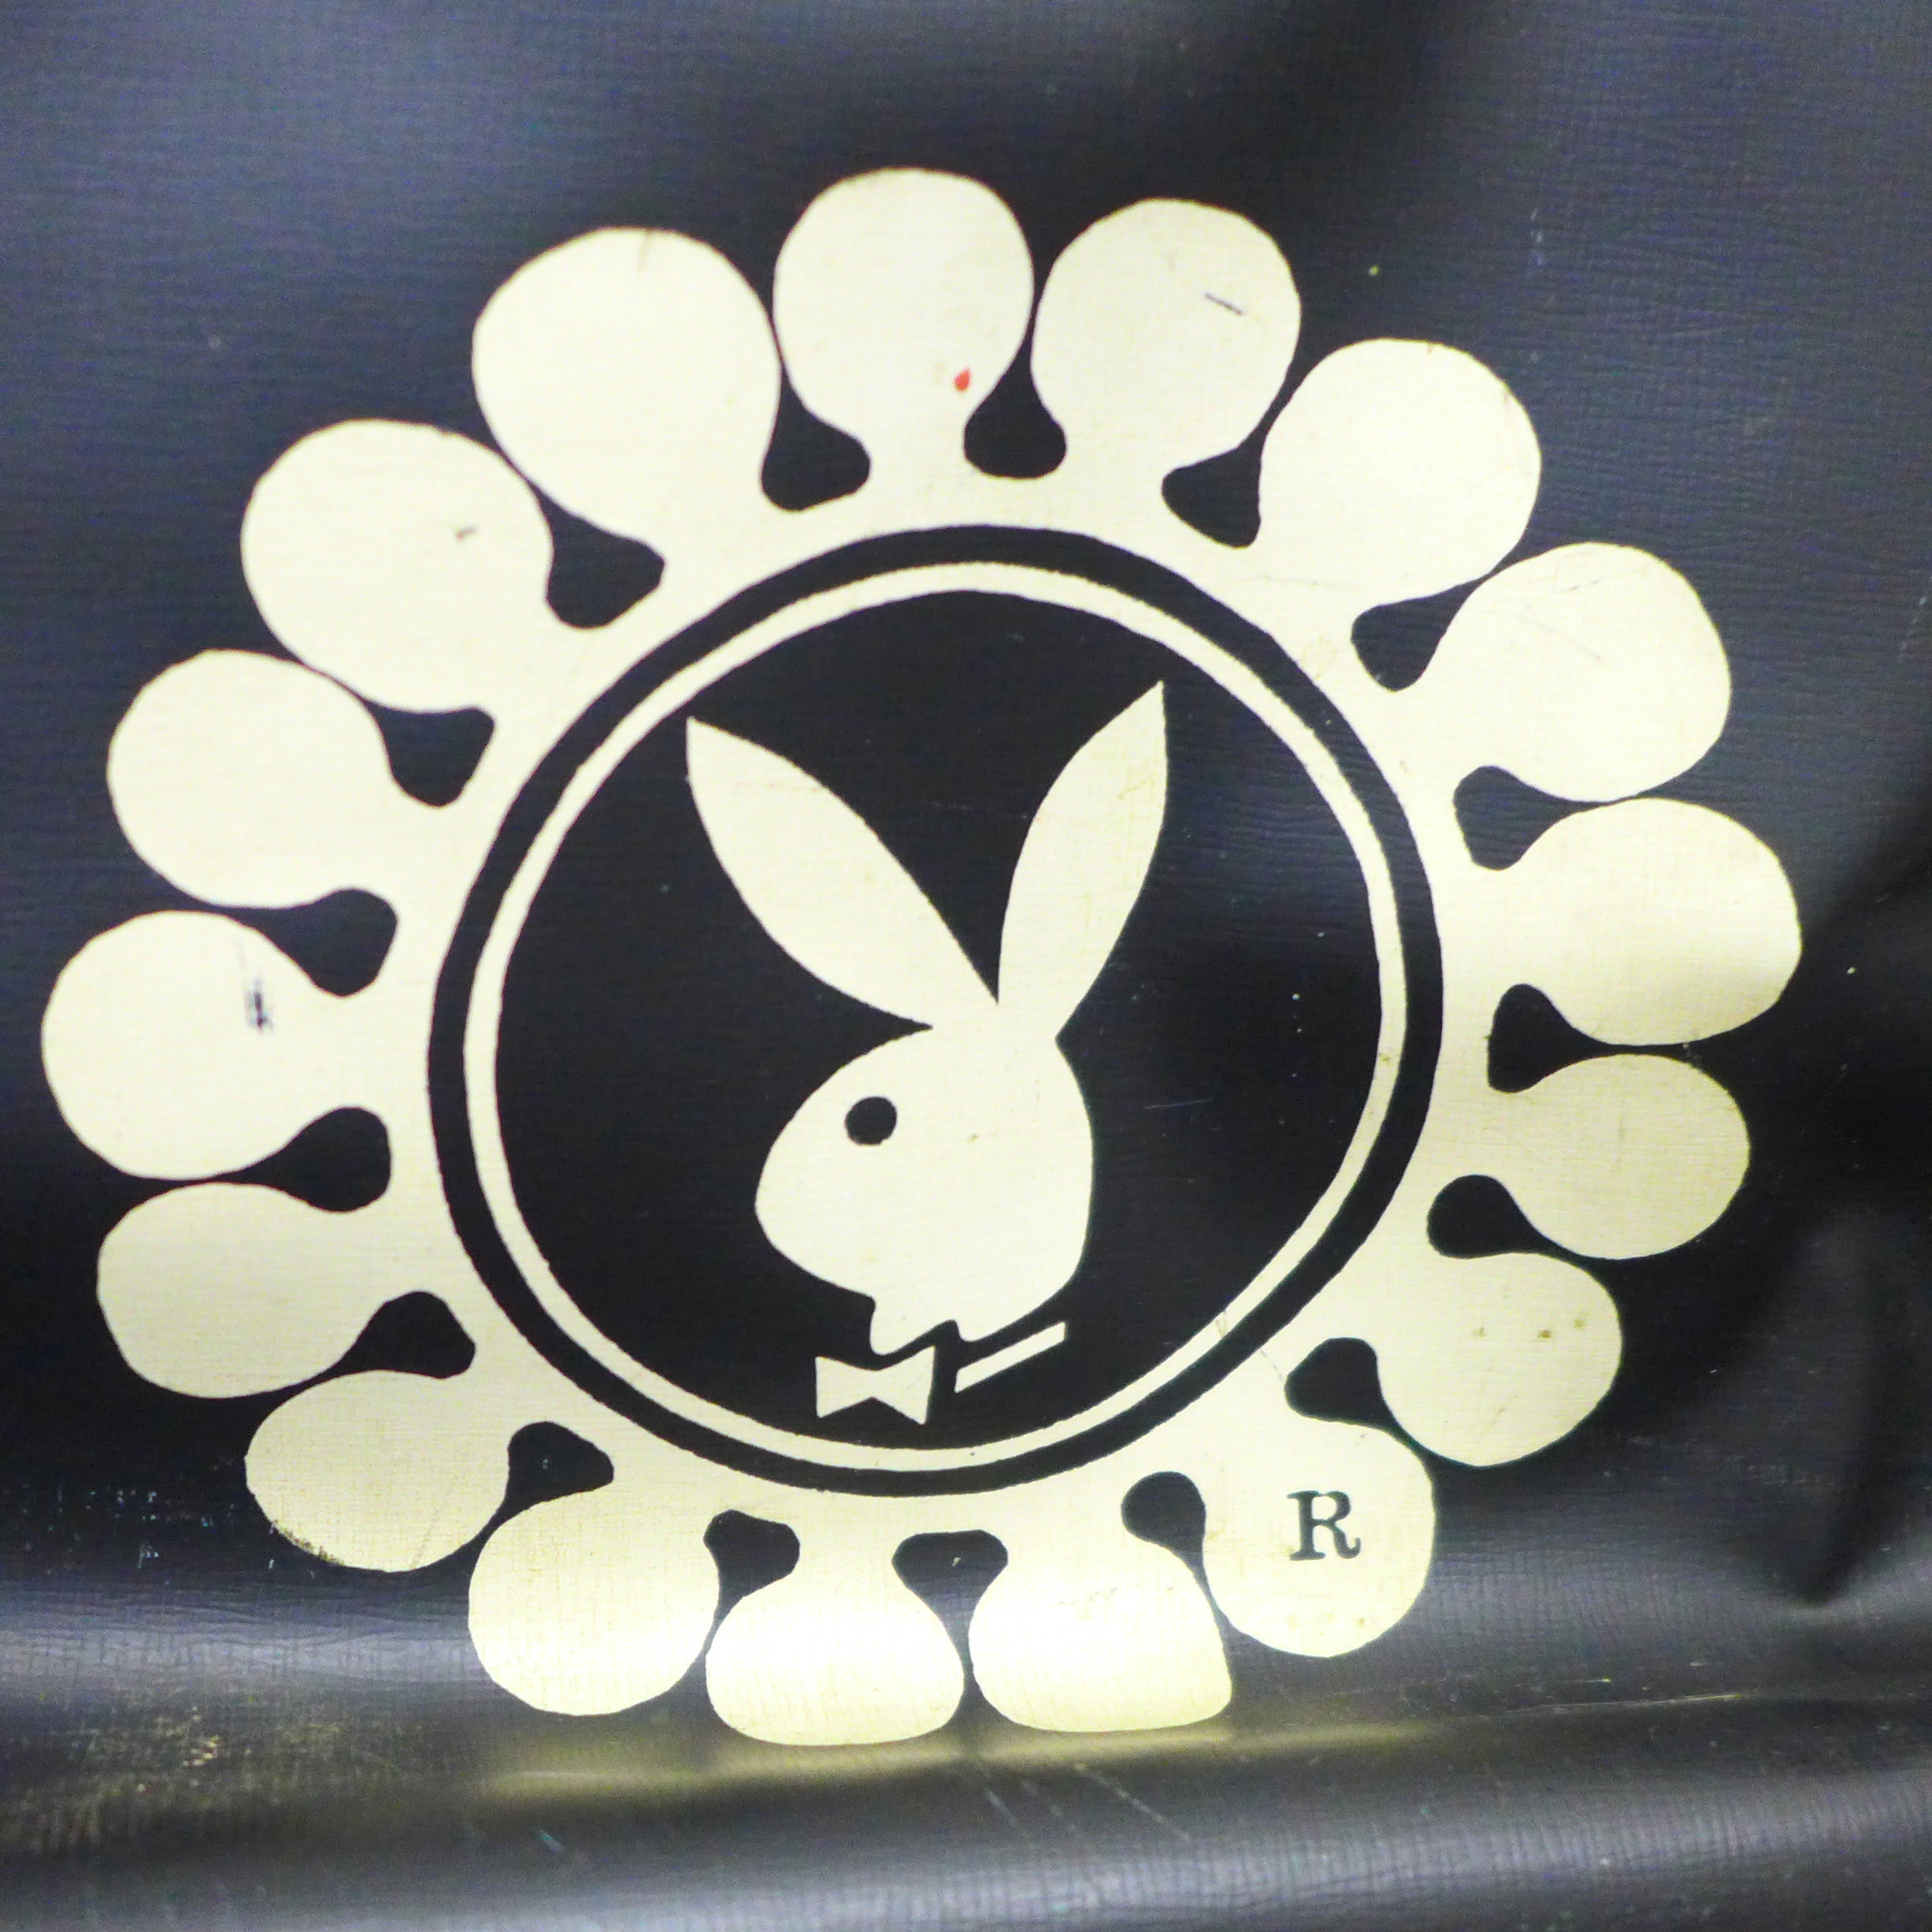 A 1960's The London Playboy Club holdall bag and a Don Juan Night Club entertainment card - Image 3 of 5